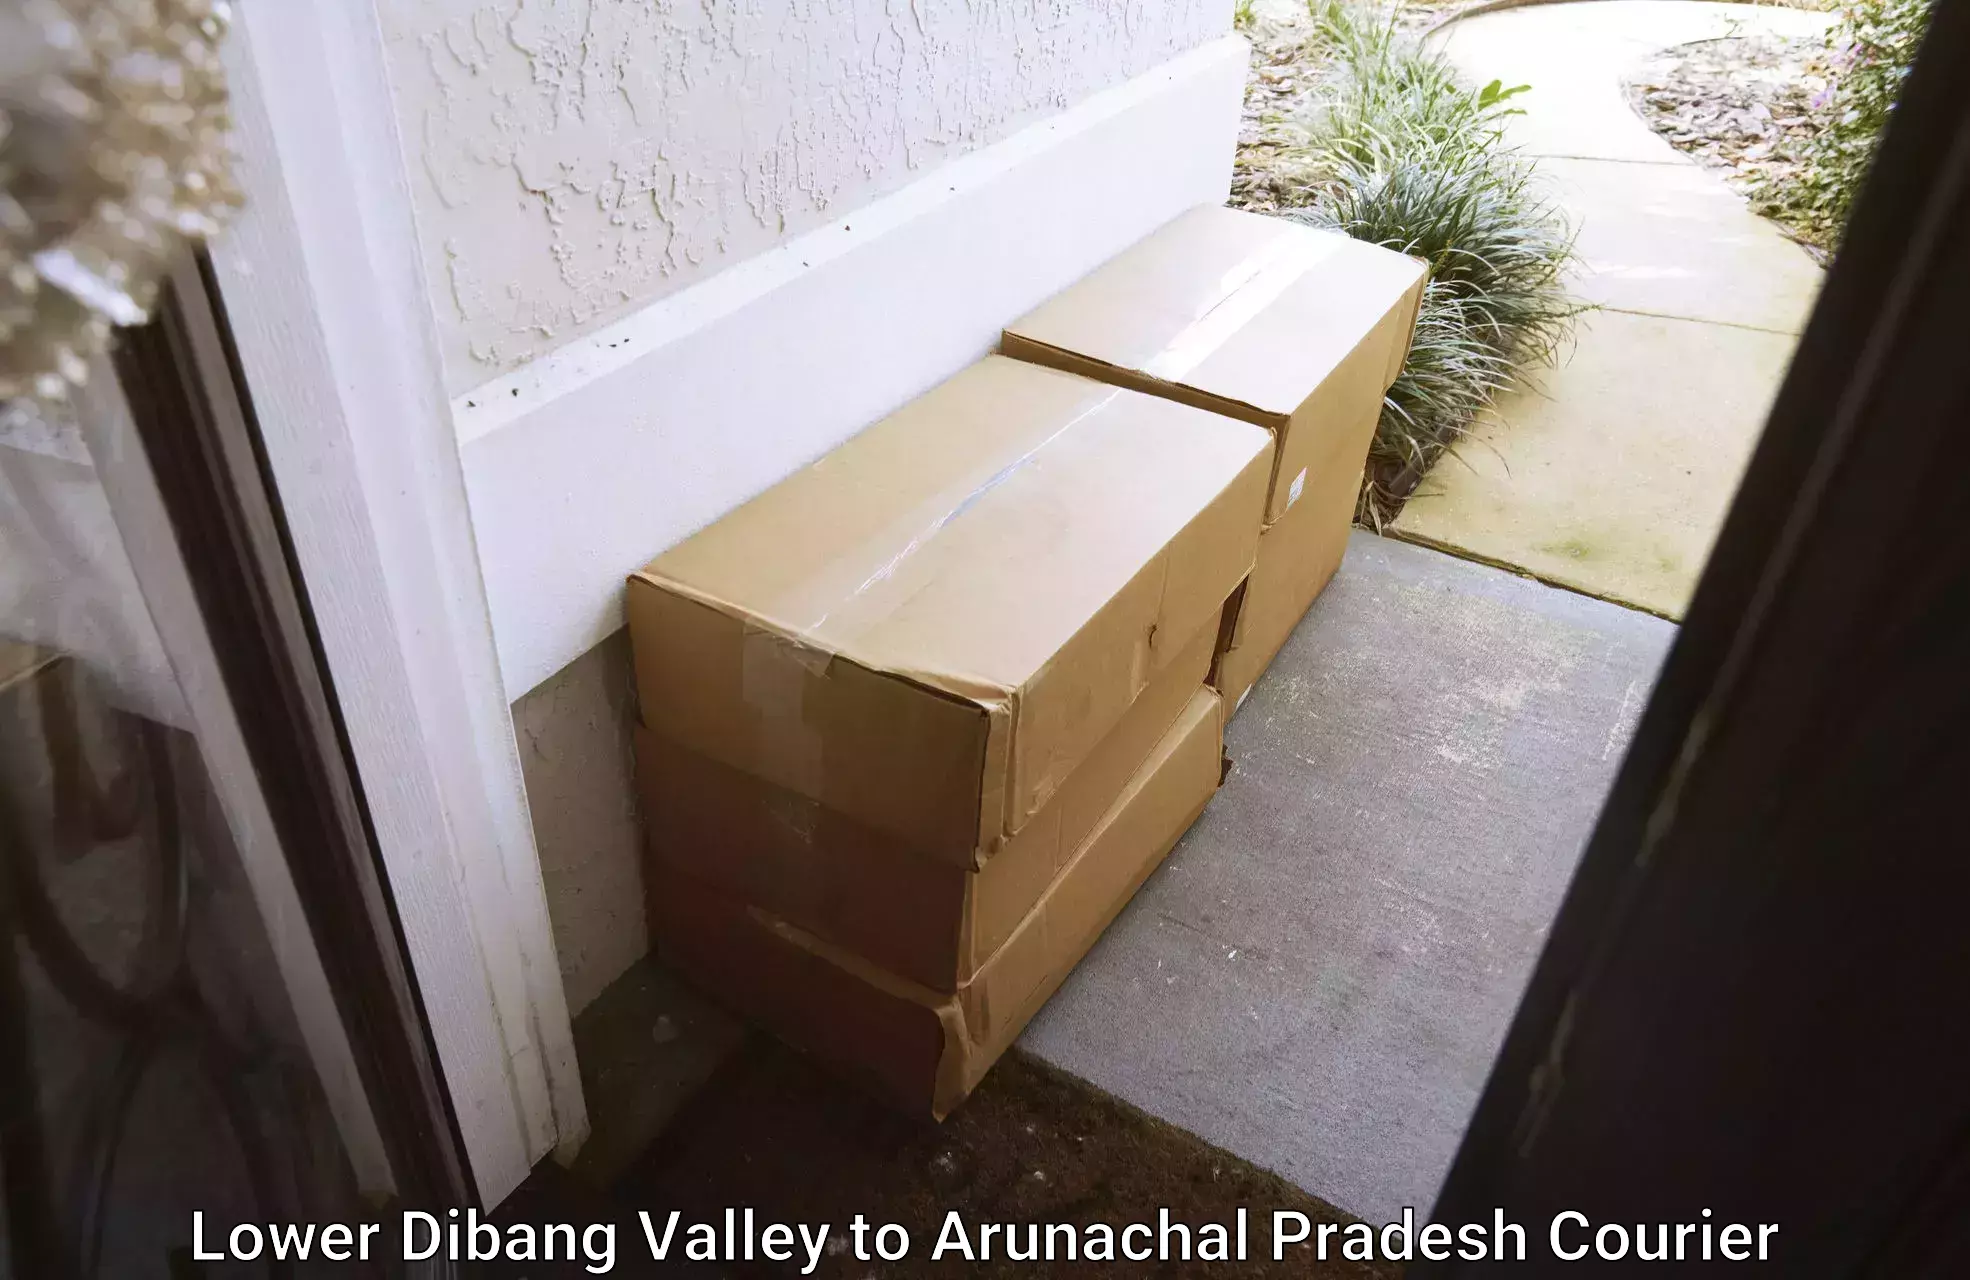 Residential courier service in Lower Dibang Valley to Longding